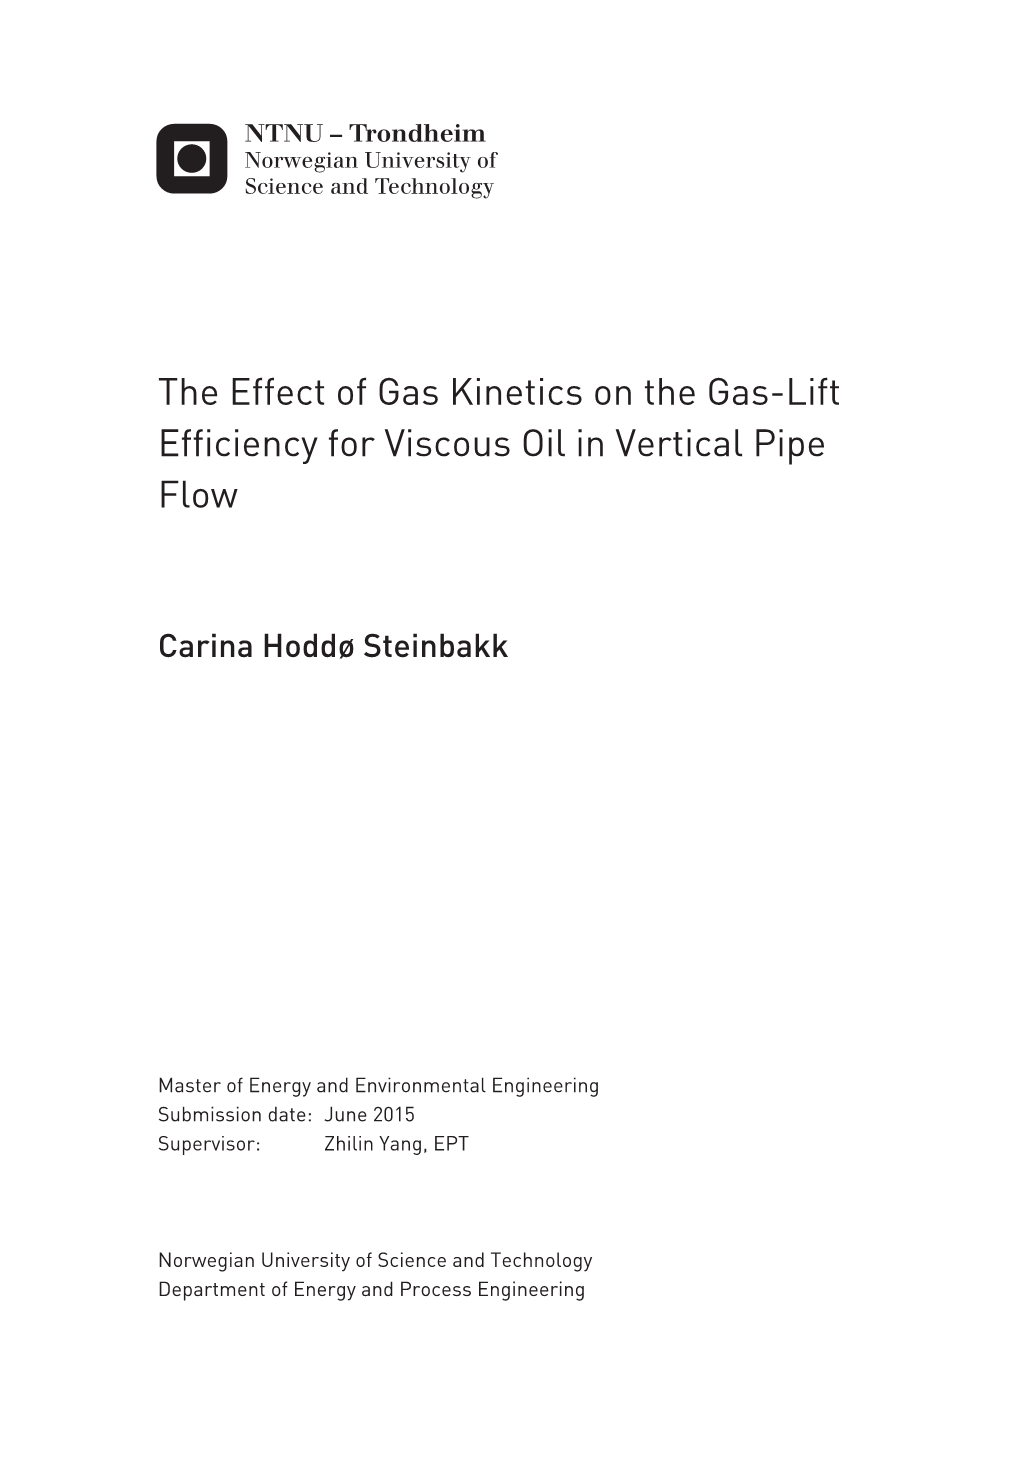 The Effect of Gas Kinetics on the Gas-Lift Efficiency for Viscous Oil in Vertical Pipe Flow